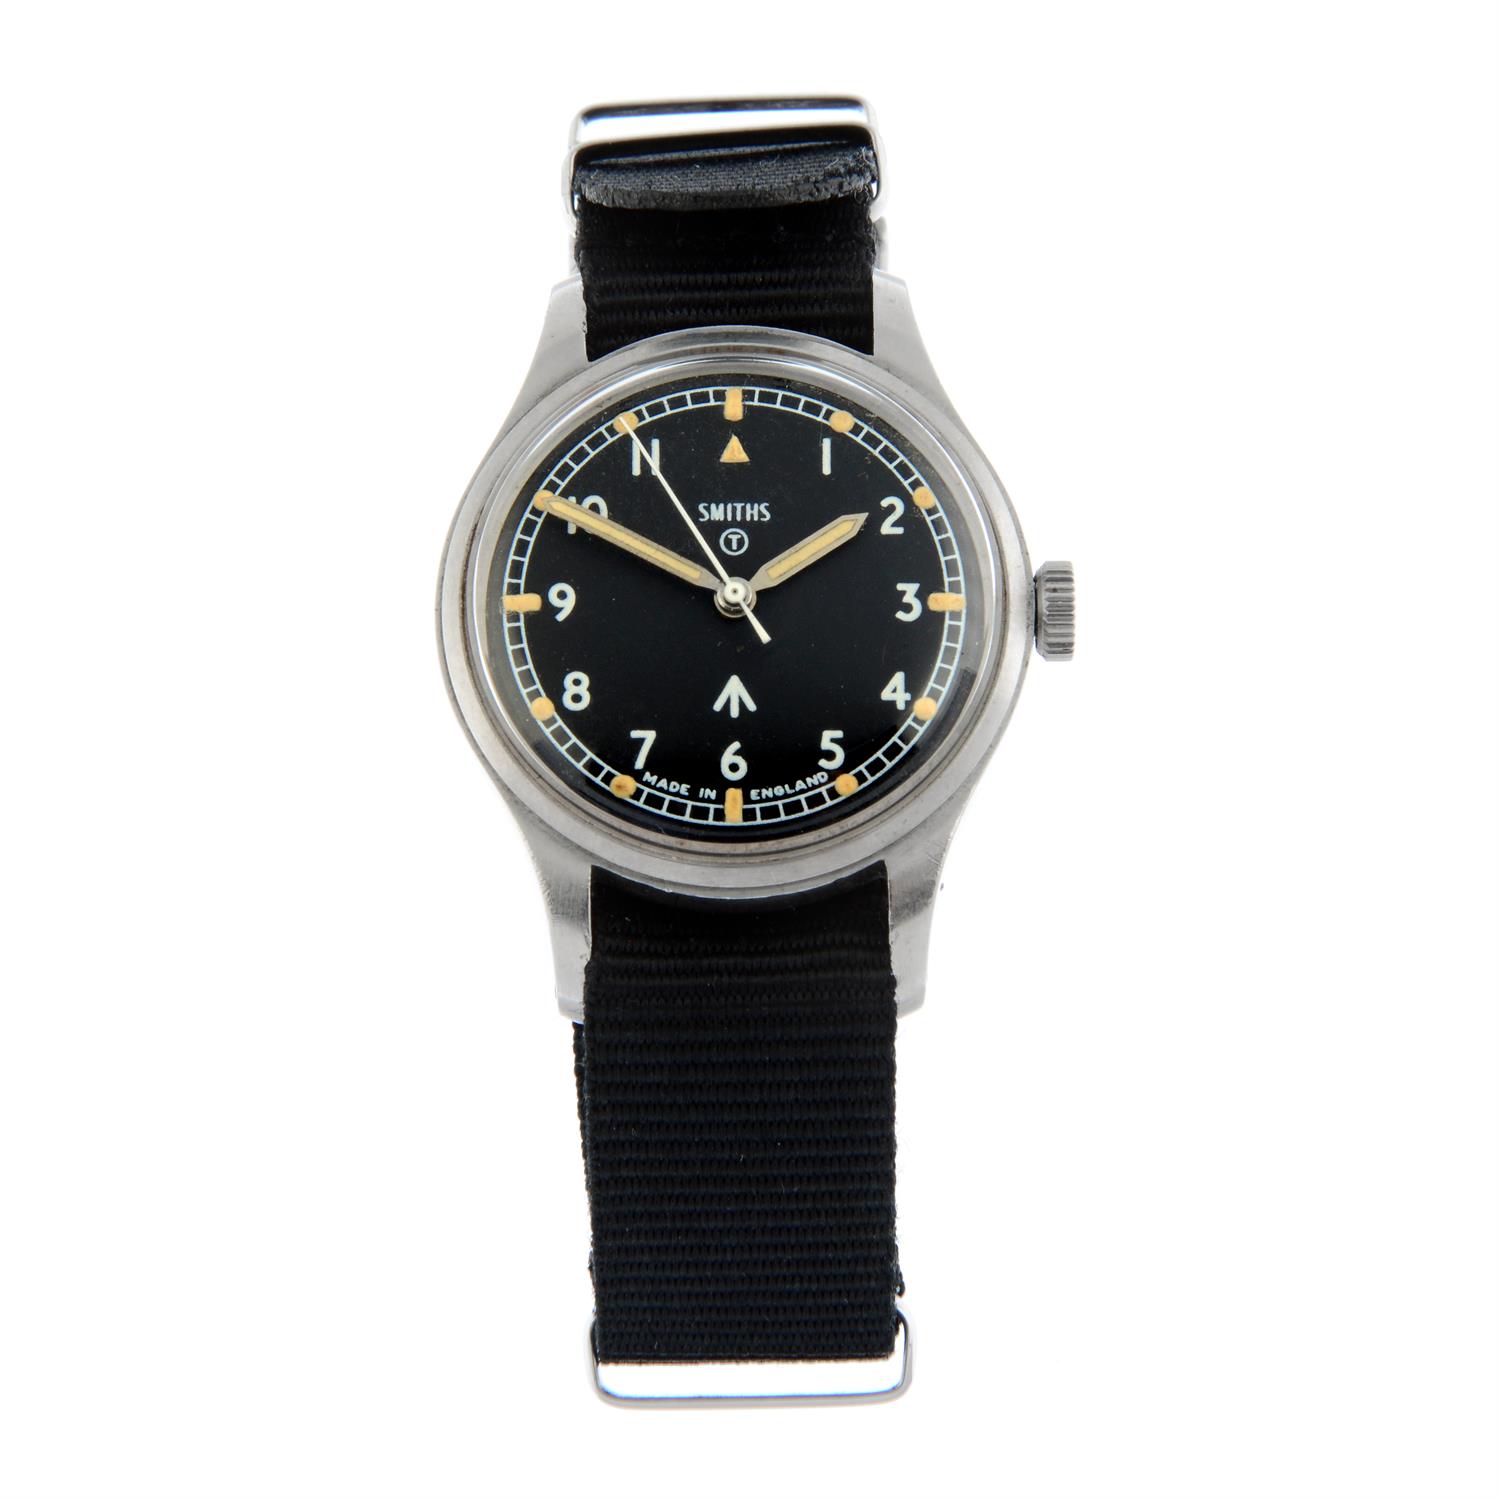 SMITHS - a stainless steel military issue wrist watch, 35mm.